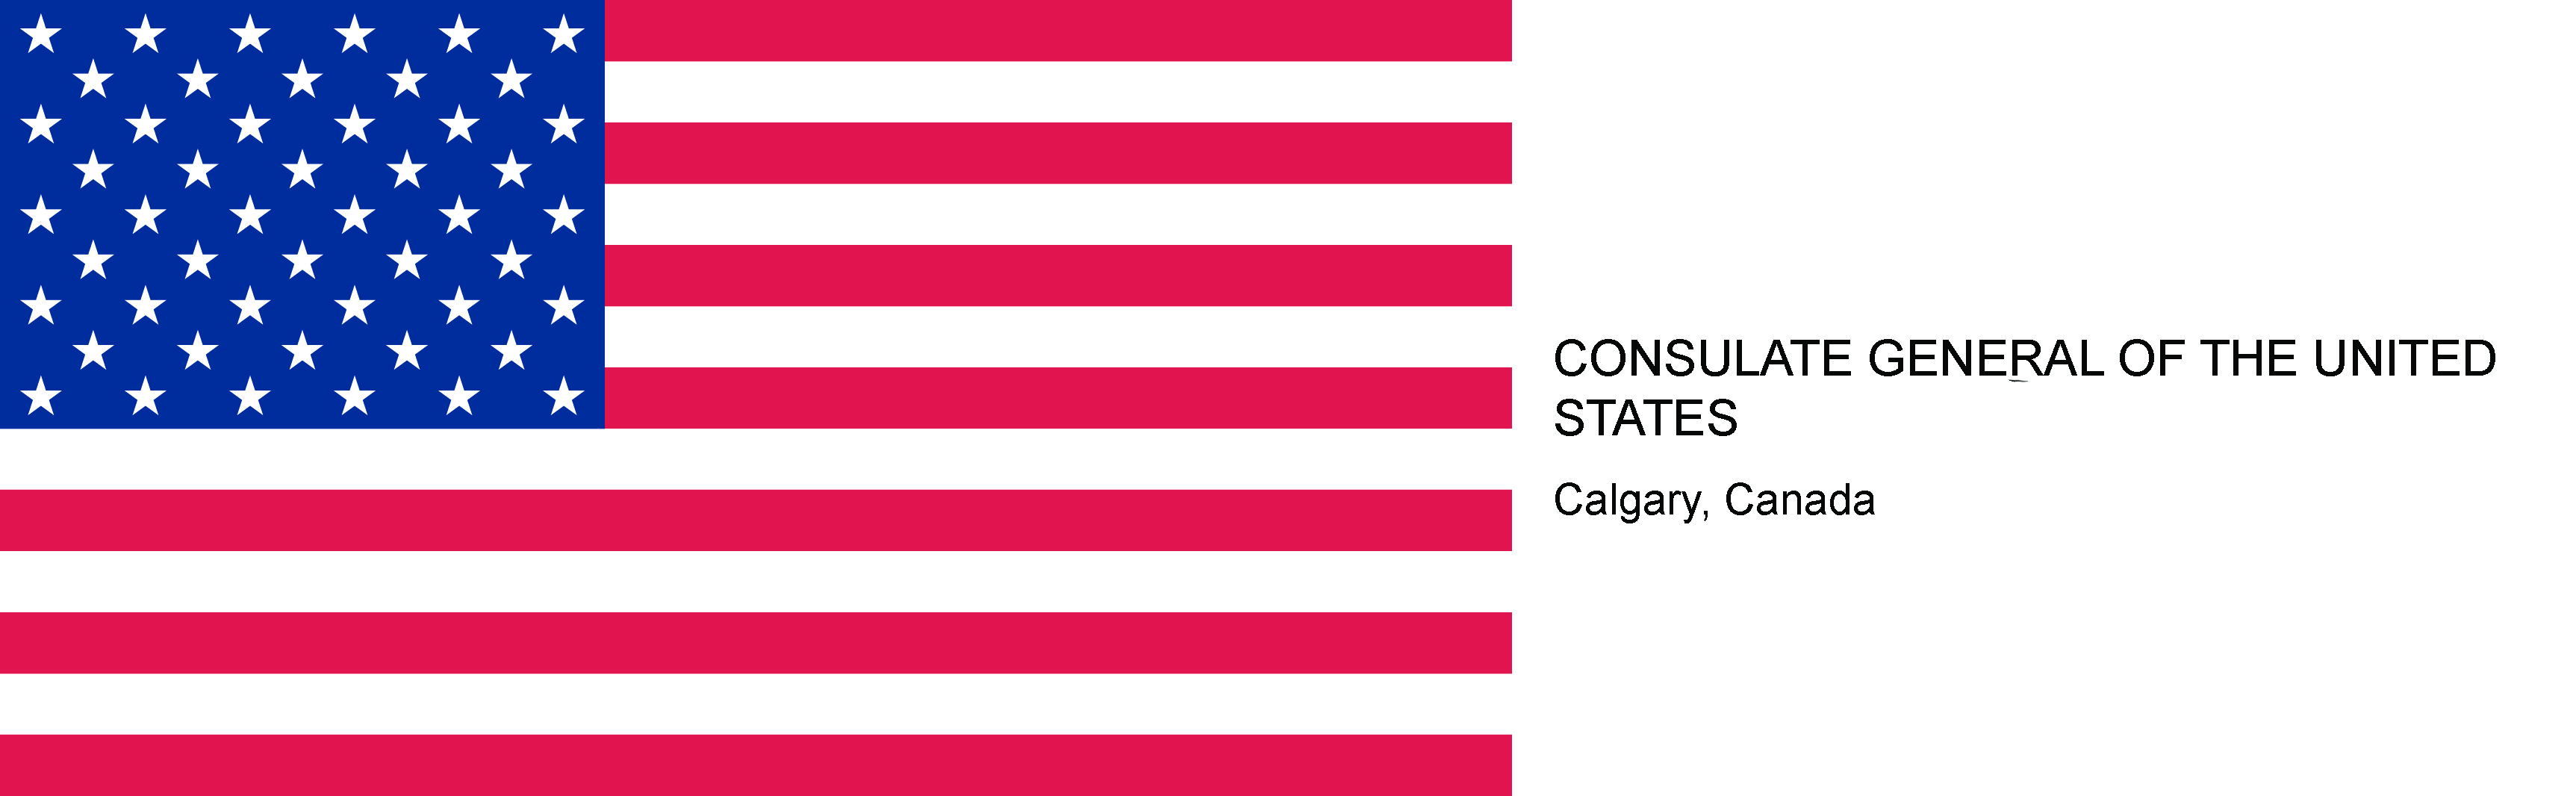 Consul General of the United States - Calgary